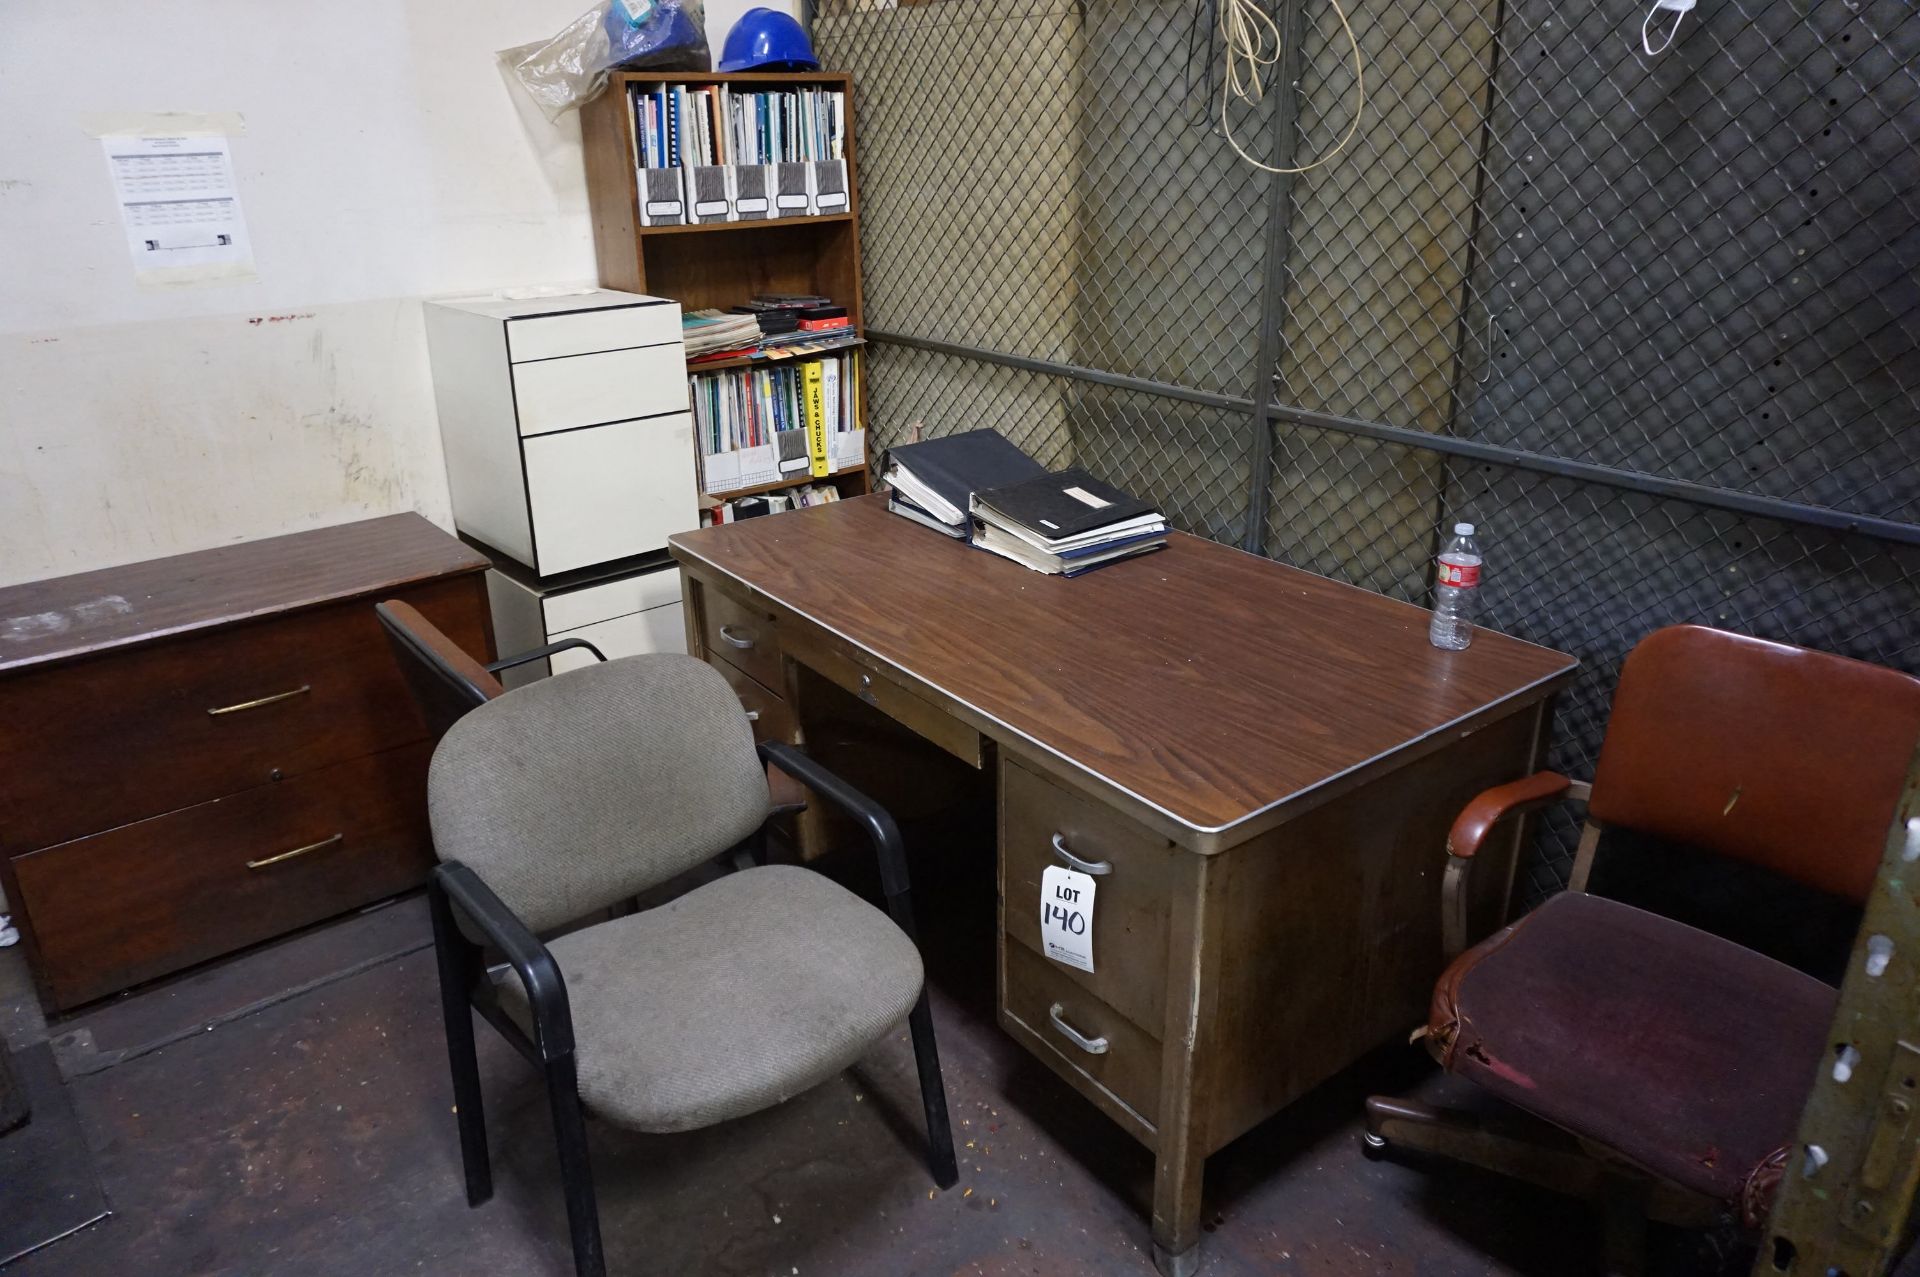 OFFICE AREA IN MACHINE SHOP TO INCLUDE: OFFICE DESK, CHAIRS, FILE CABINETS, SHELVING **Rigging